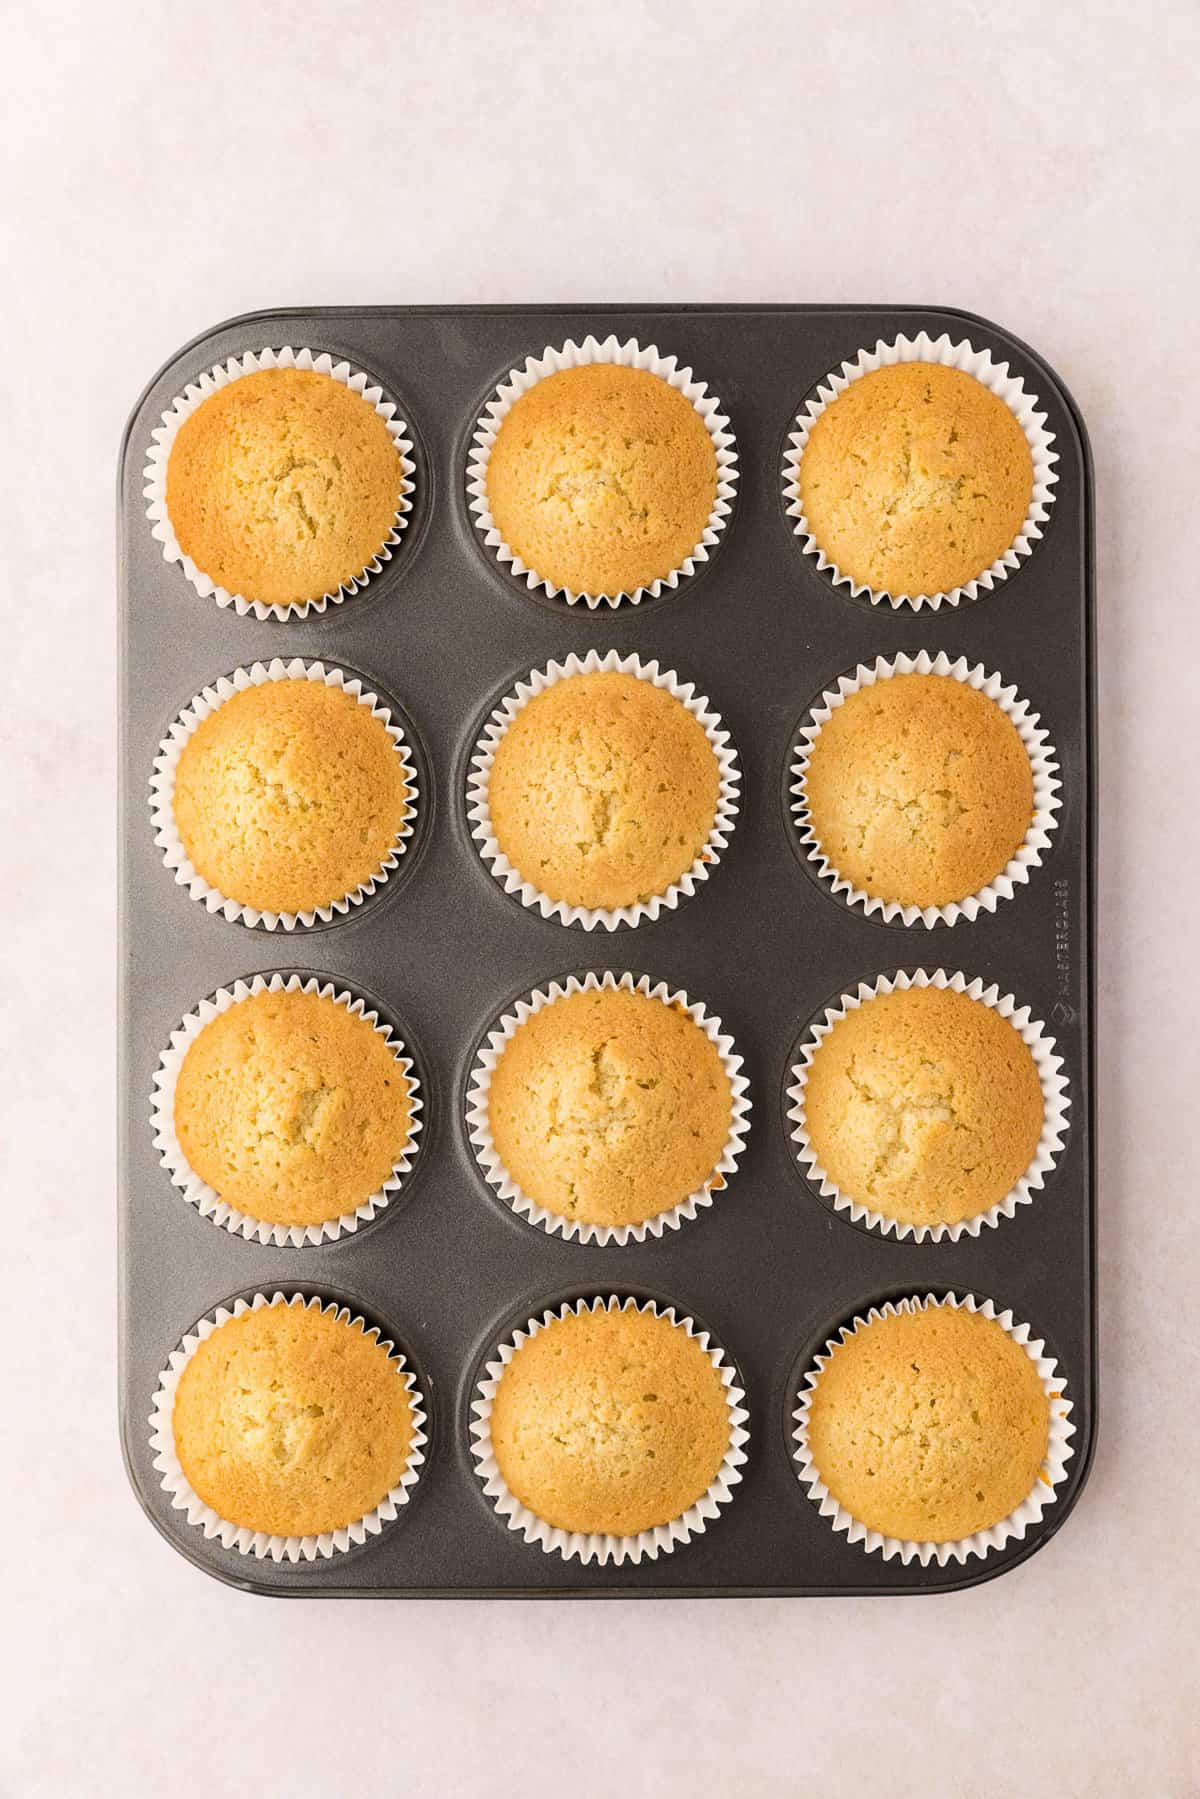 Easter Cupcake Recipe Baked to a Golden Brown in Muffin Tin